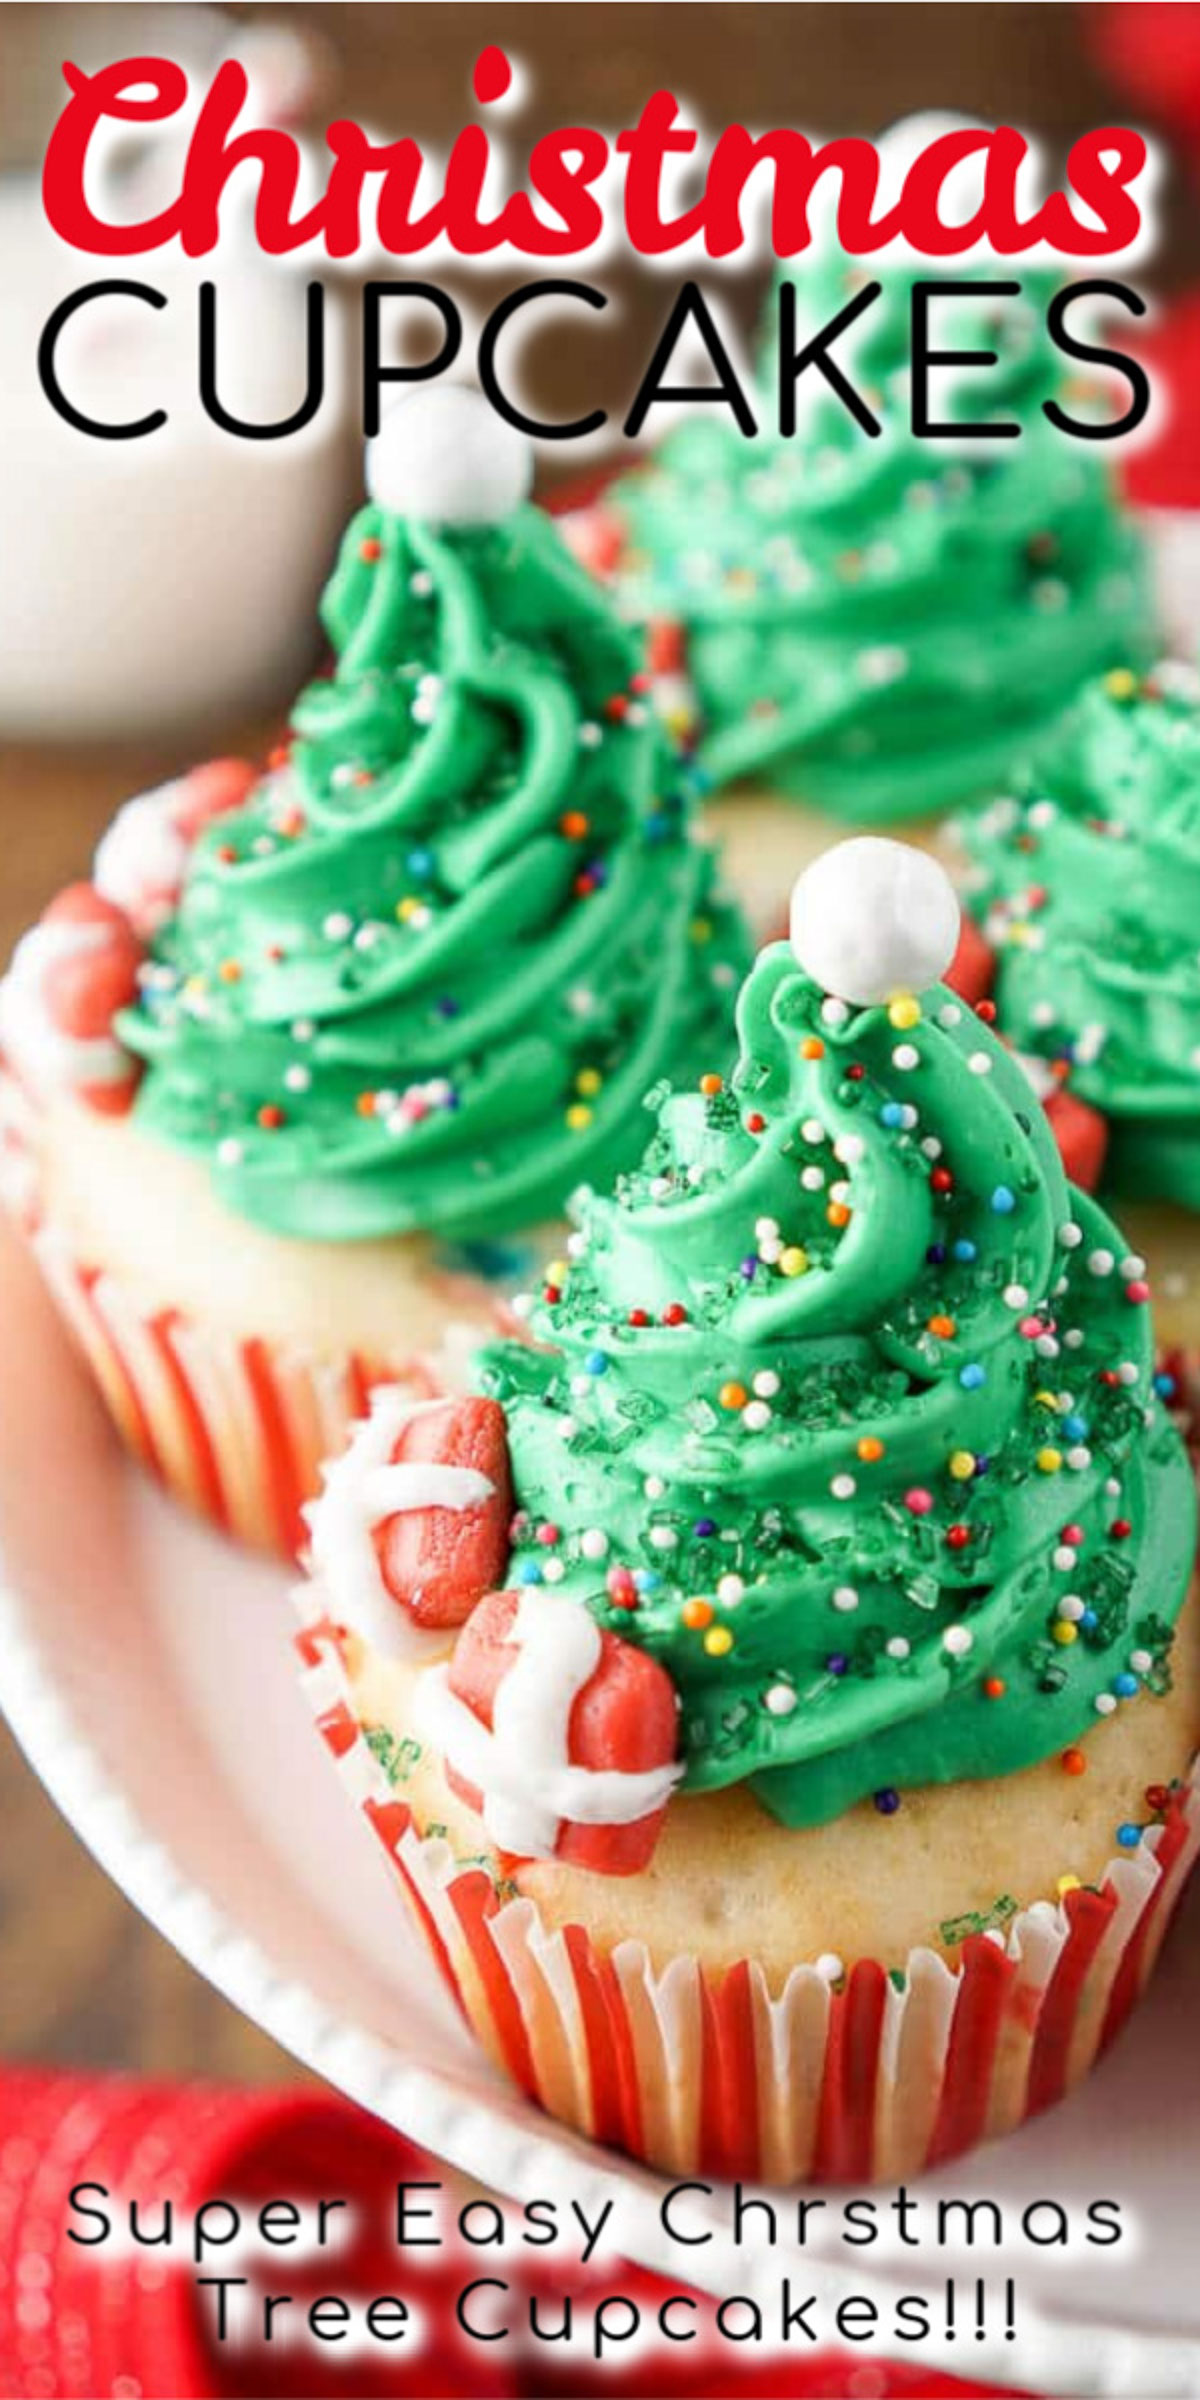 These Christmas Tree Cupcakes are easier than they look and are such a fun and festive dessert for holiday parties! Made with boxed cake mix, you can whip the cupcakes up quick and get decorating in no time! via @sugarandsoulco